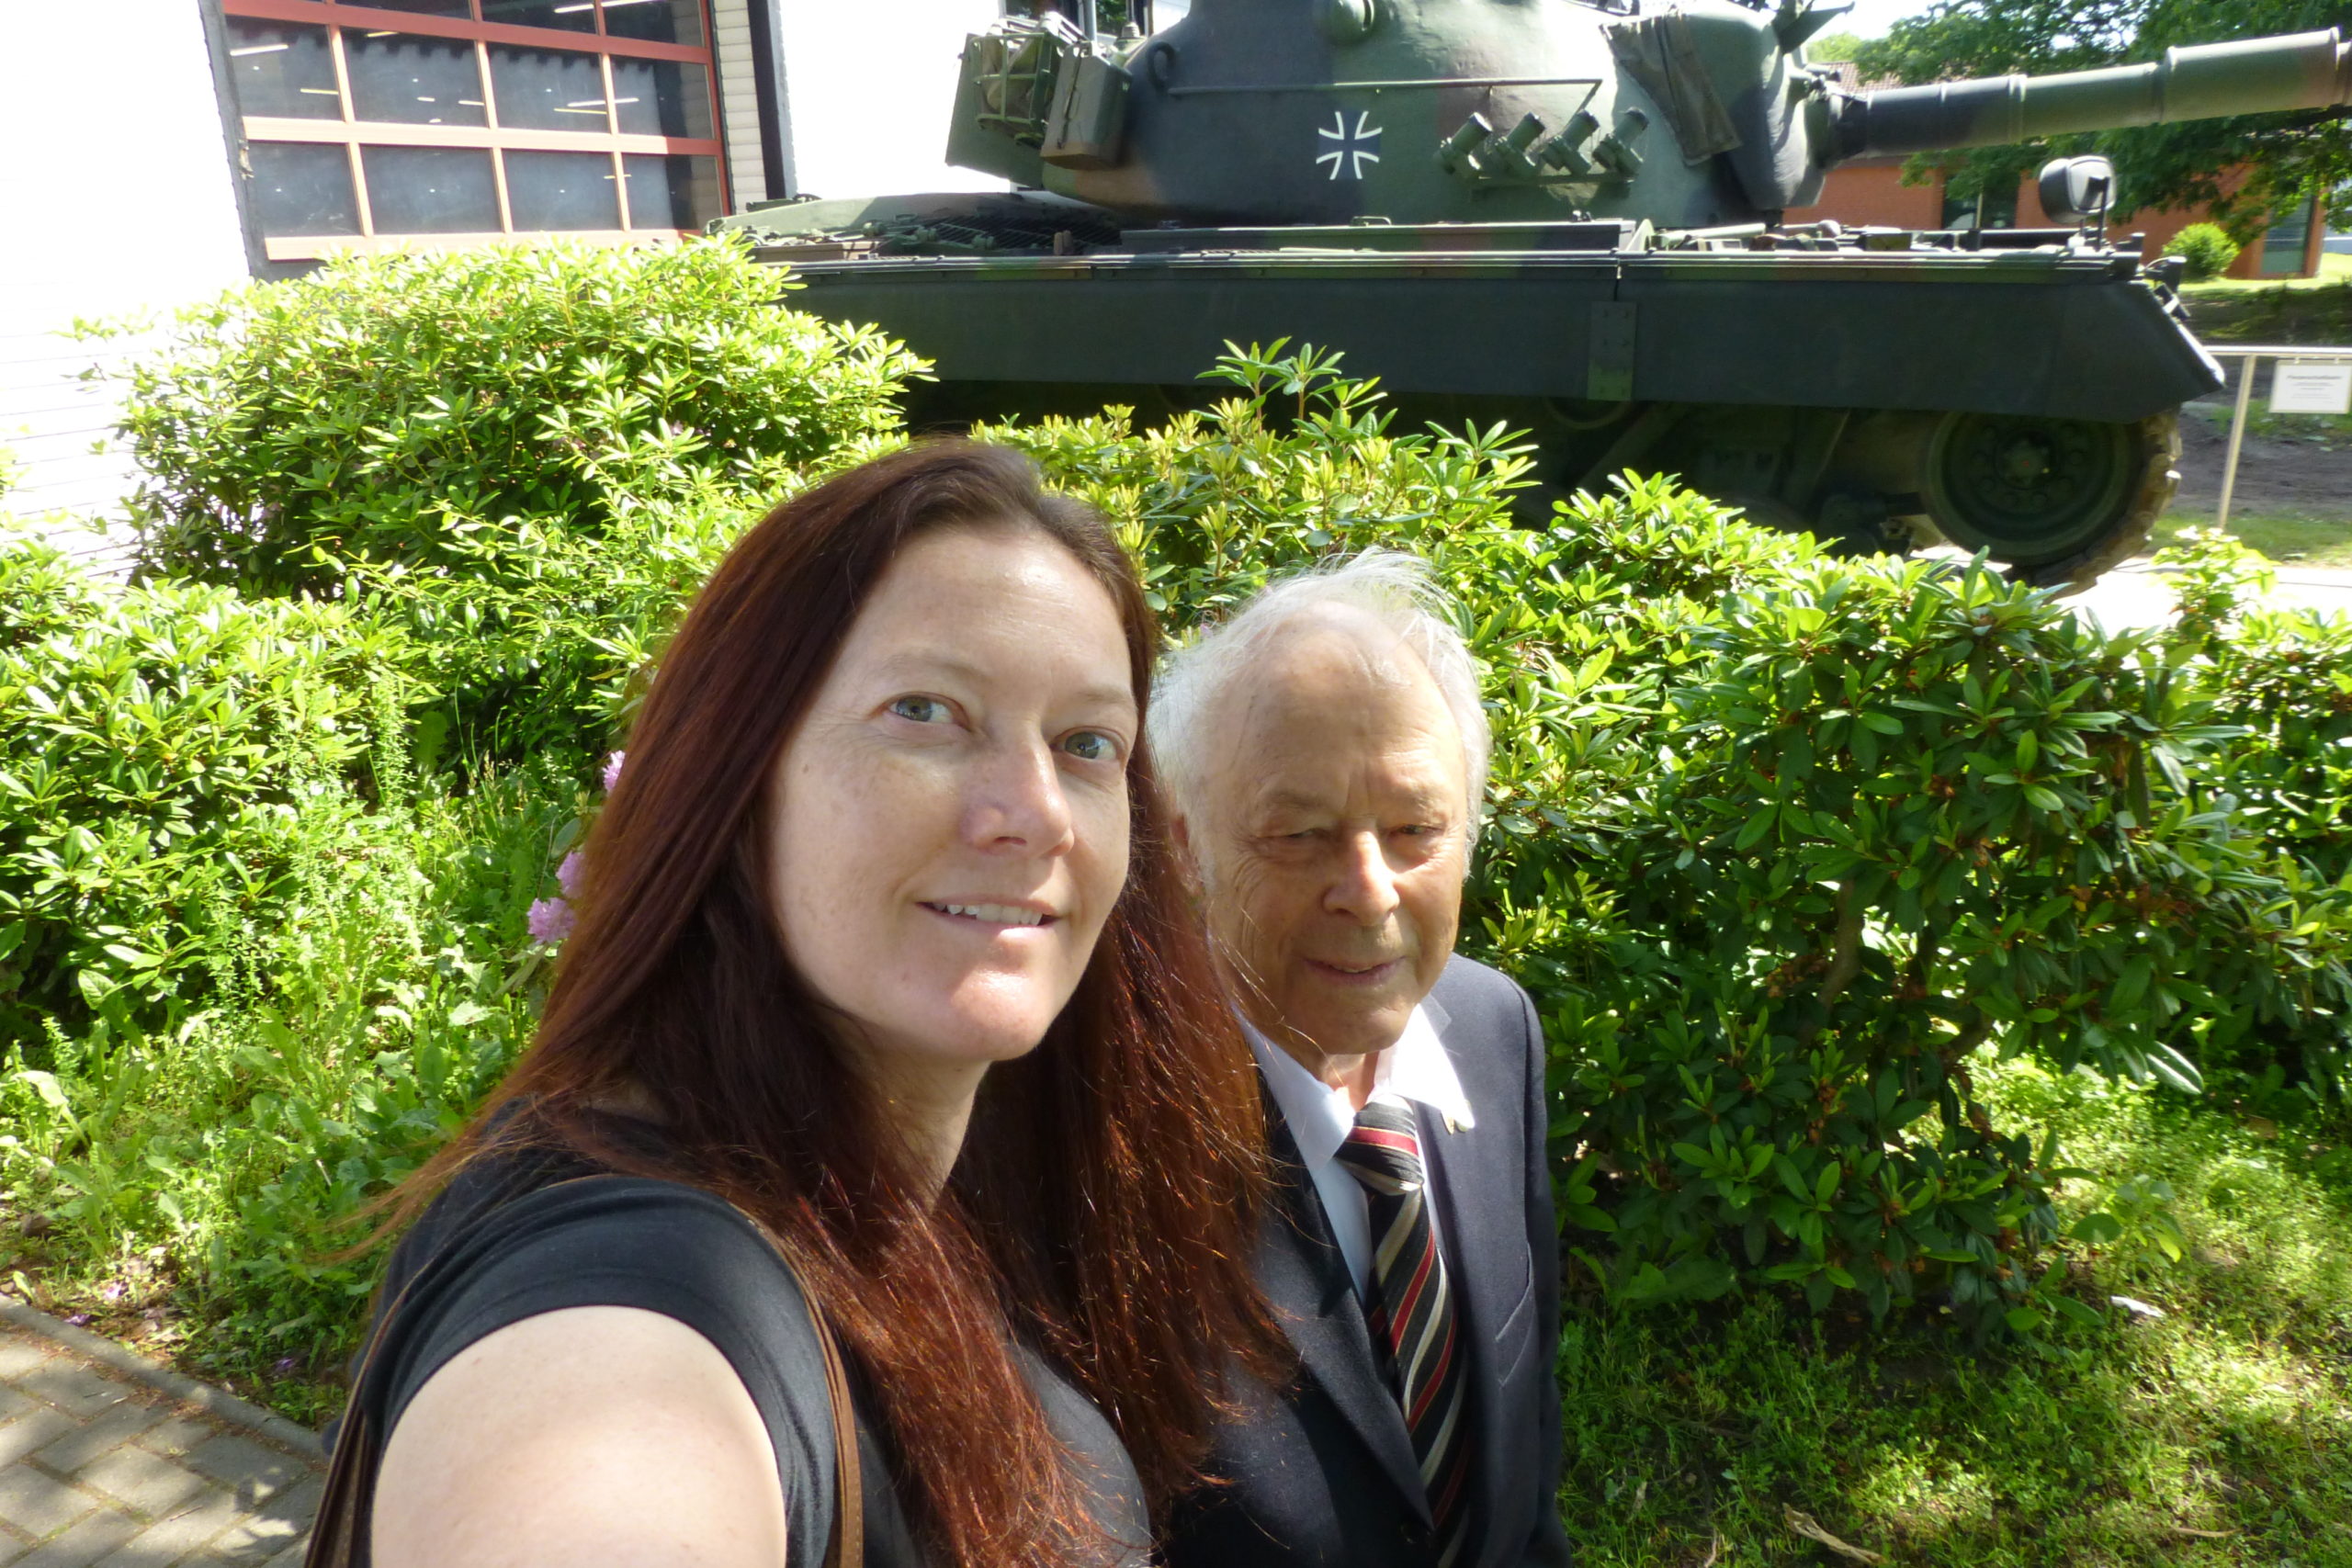 Heather Steele and Charley Koenig at the Panzer Museum in Munster, Germany for its 30th anniversary celebration